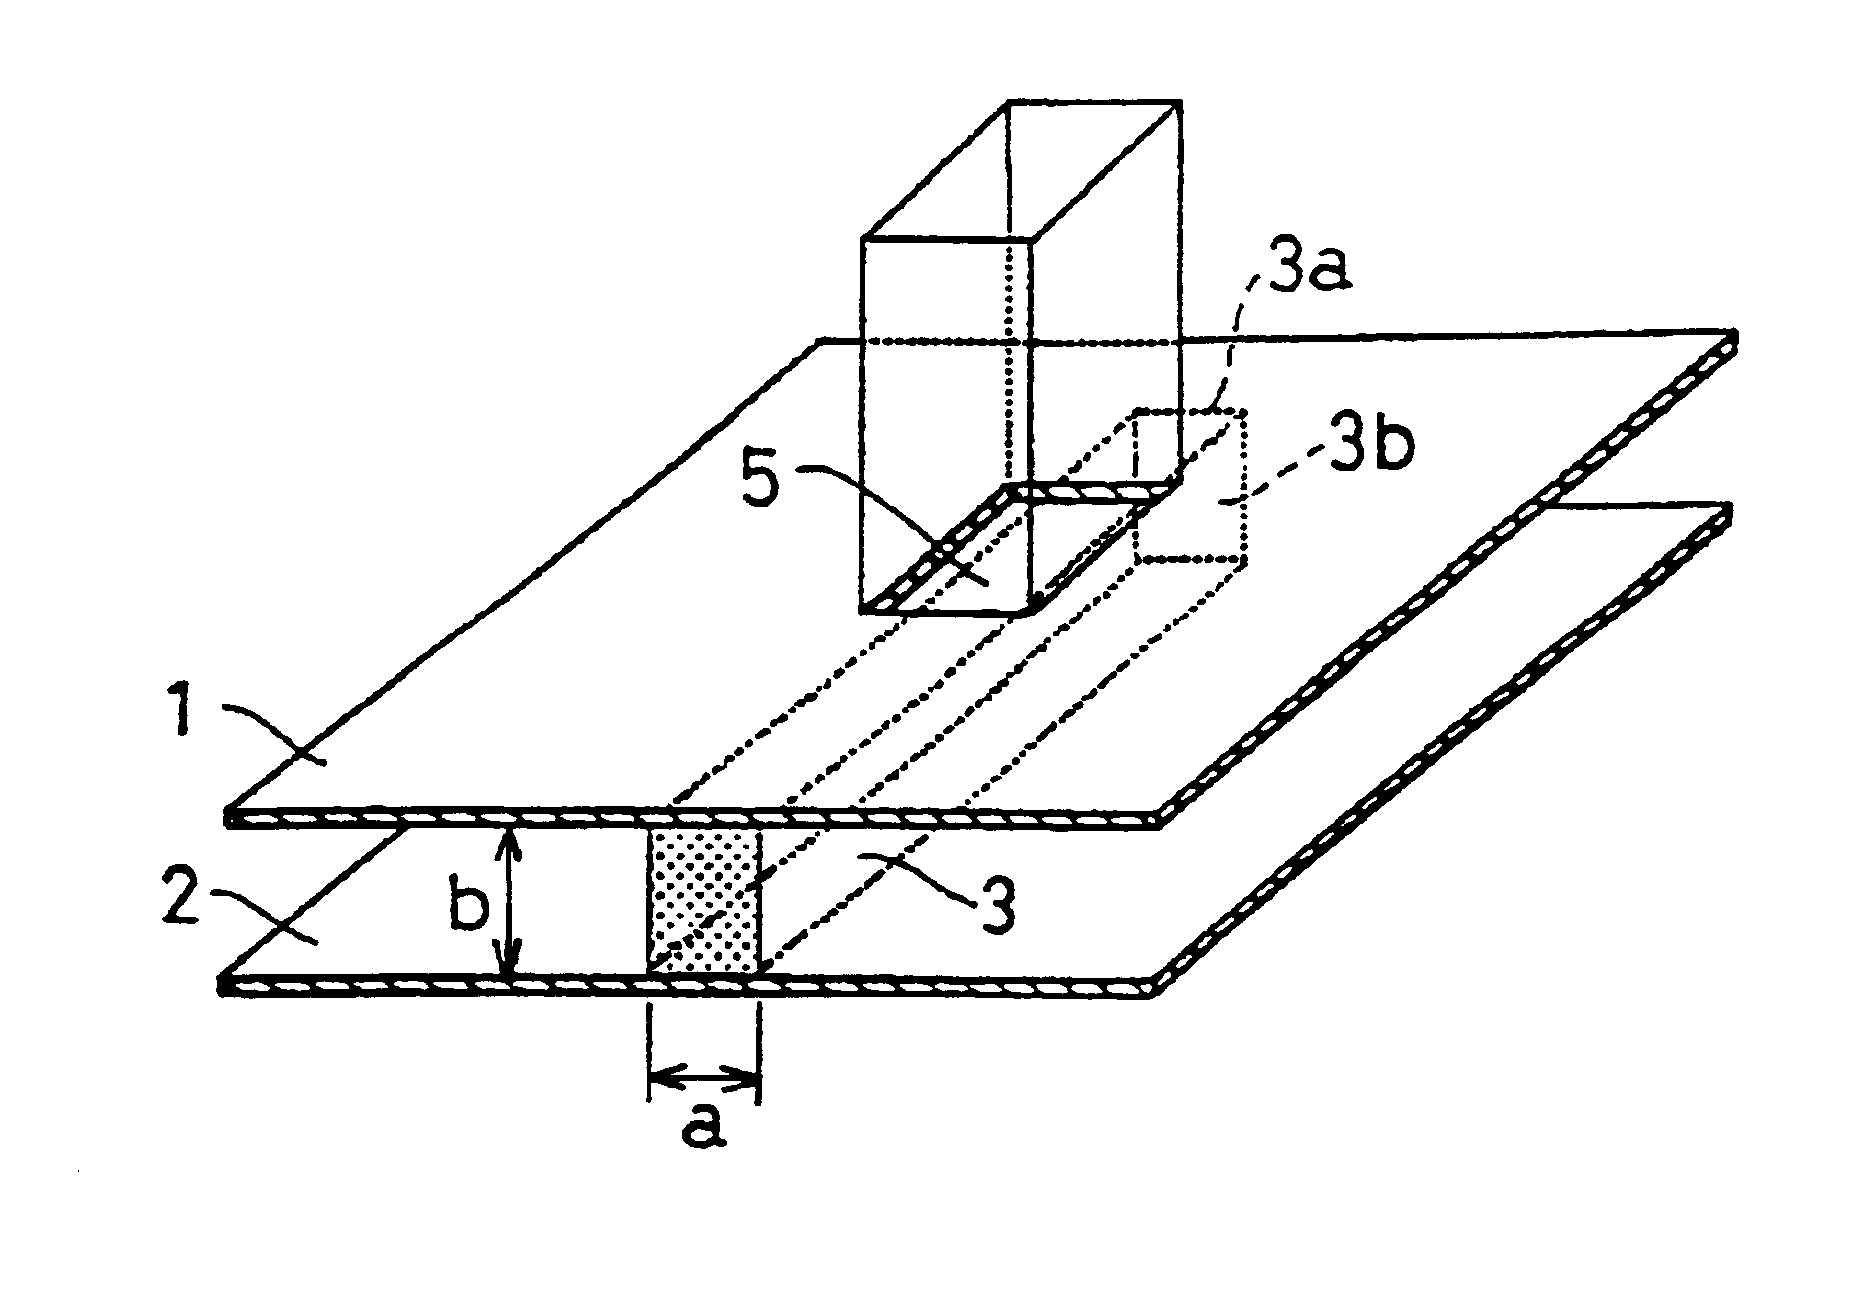 Structure for connecting non-radiative dielectric waveguide and metal waveguide, millimeter wave transmitting/receiving module and millimeter wave transmitter/receiver